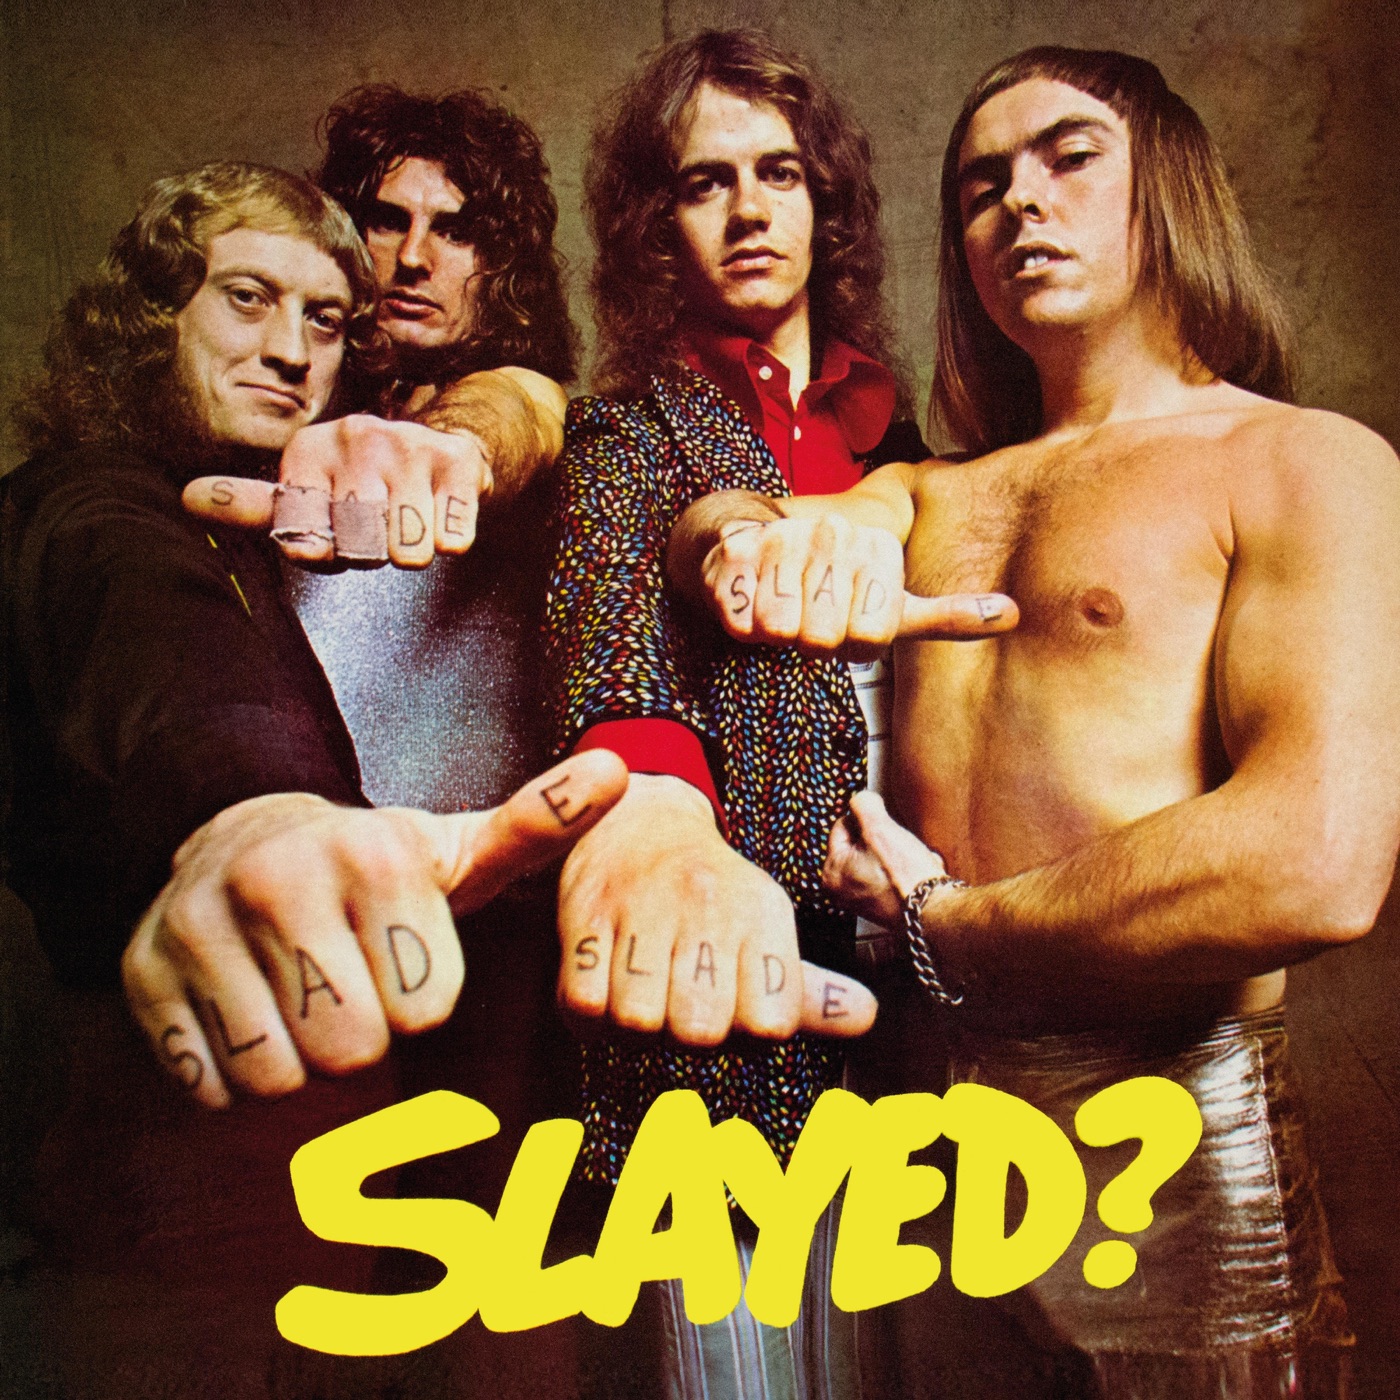 Slayed? (Expanded) by Slade